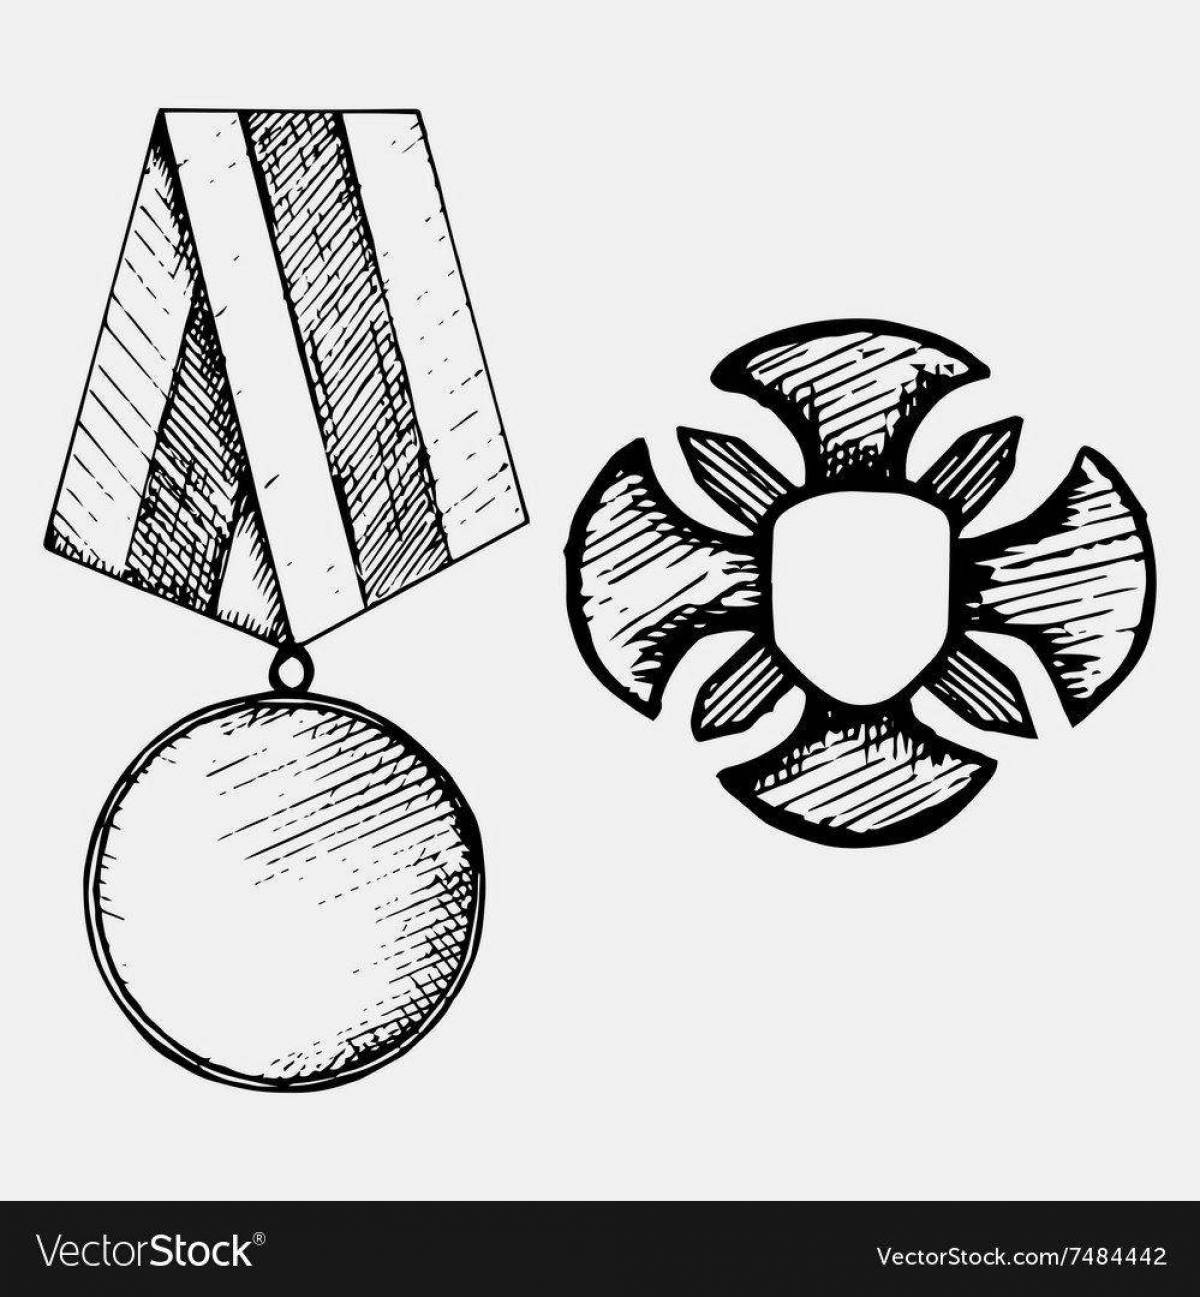 Awesome medal of honor coloring page